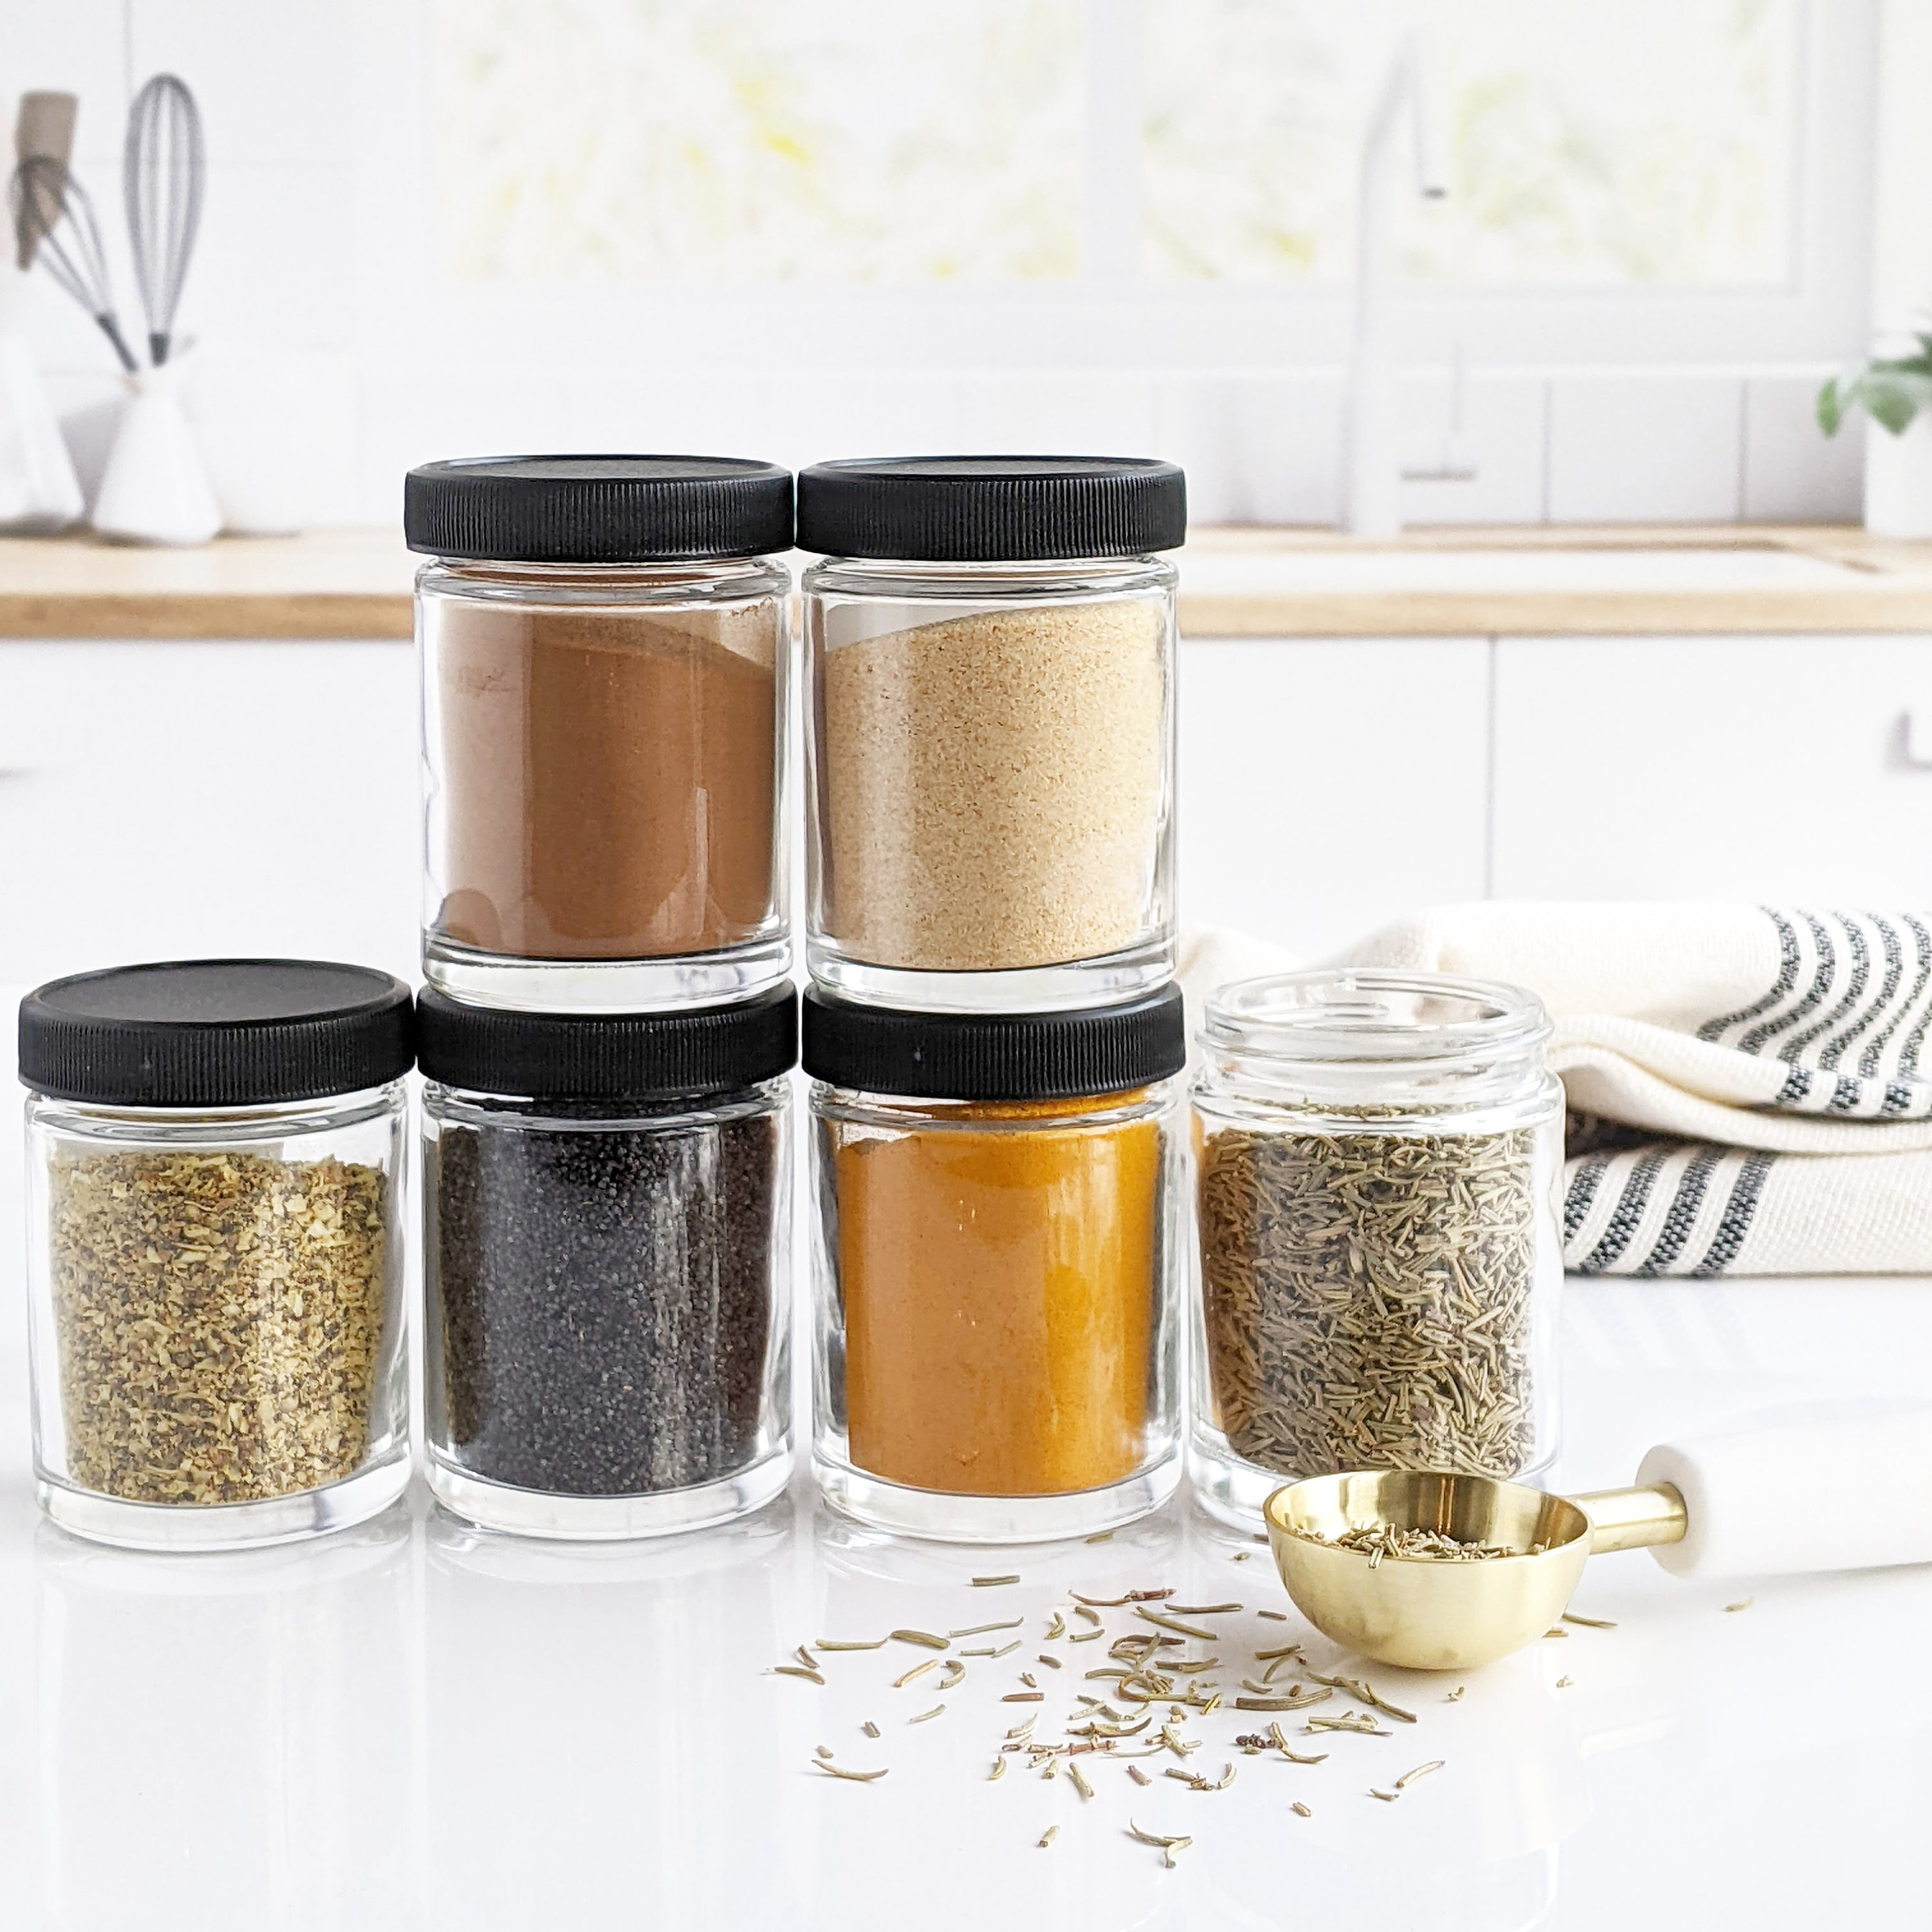  24 Silver Metal Lids for Square Spice Jars - FITS SpiceLuxe  JARS ONLY: Home & Kitchen